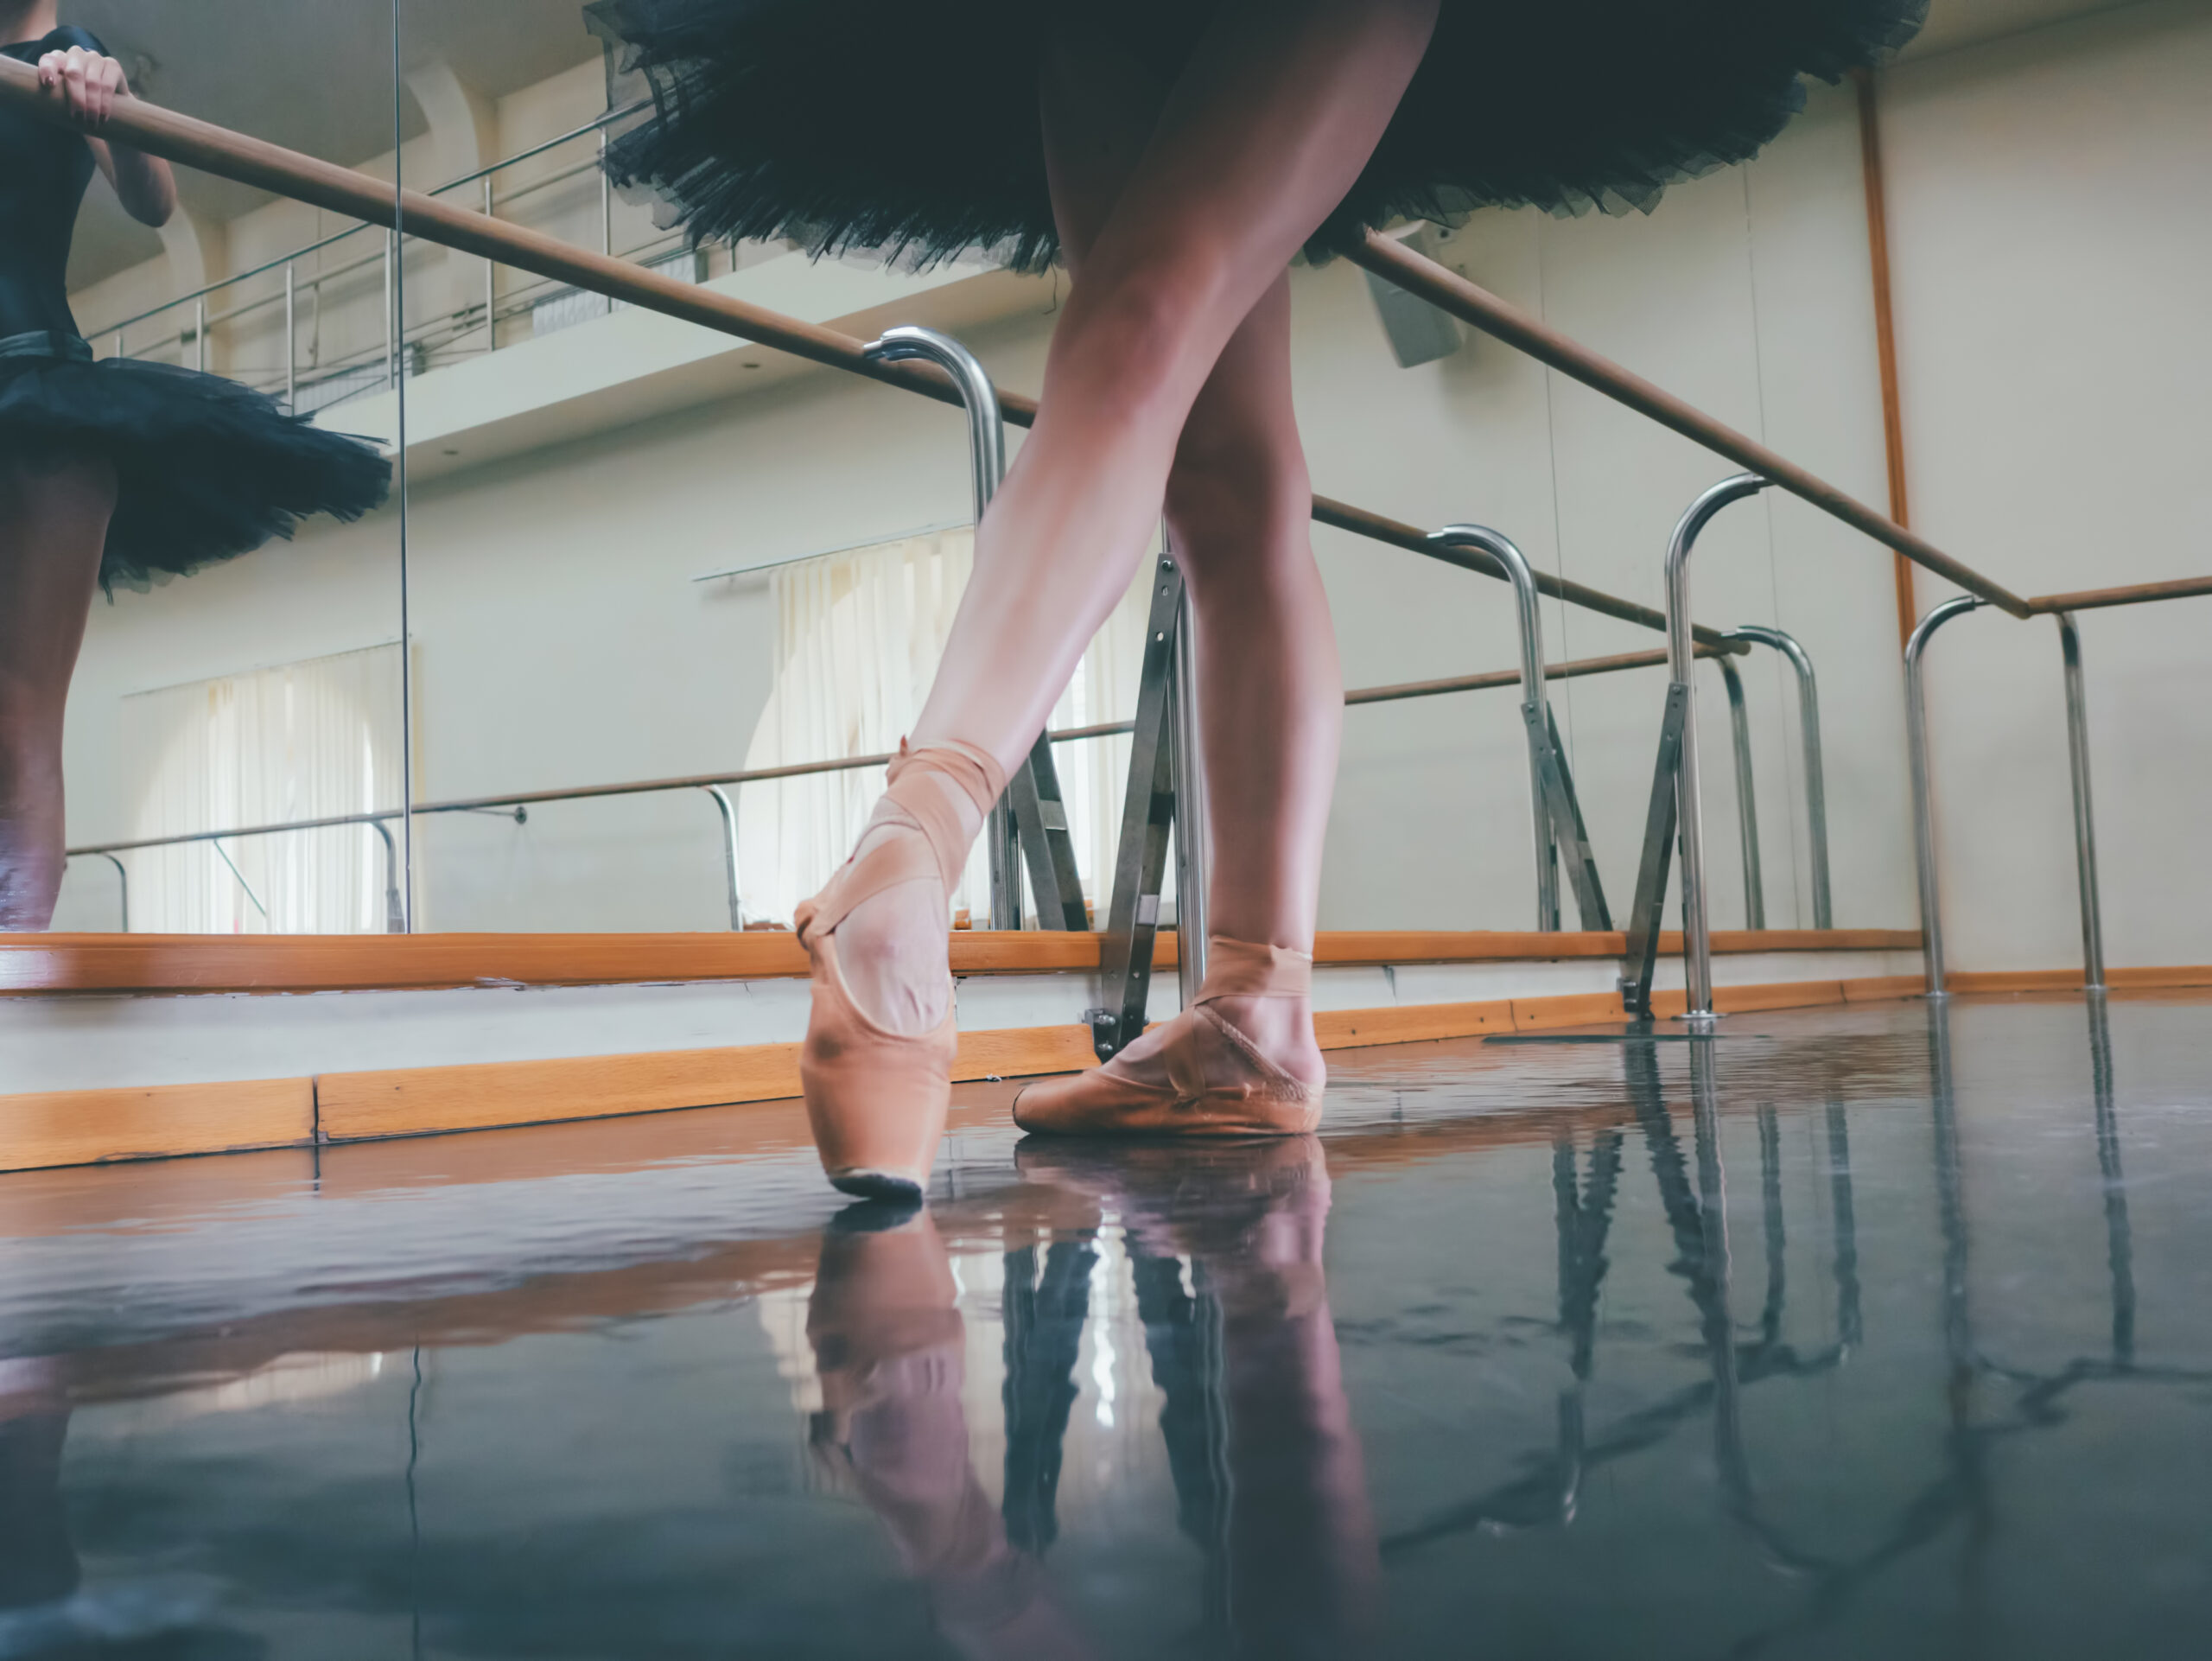 Ballerina dancer in ballet pointe shoes stretches on barre. Woman practicing in studio tutu